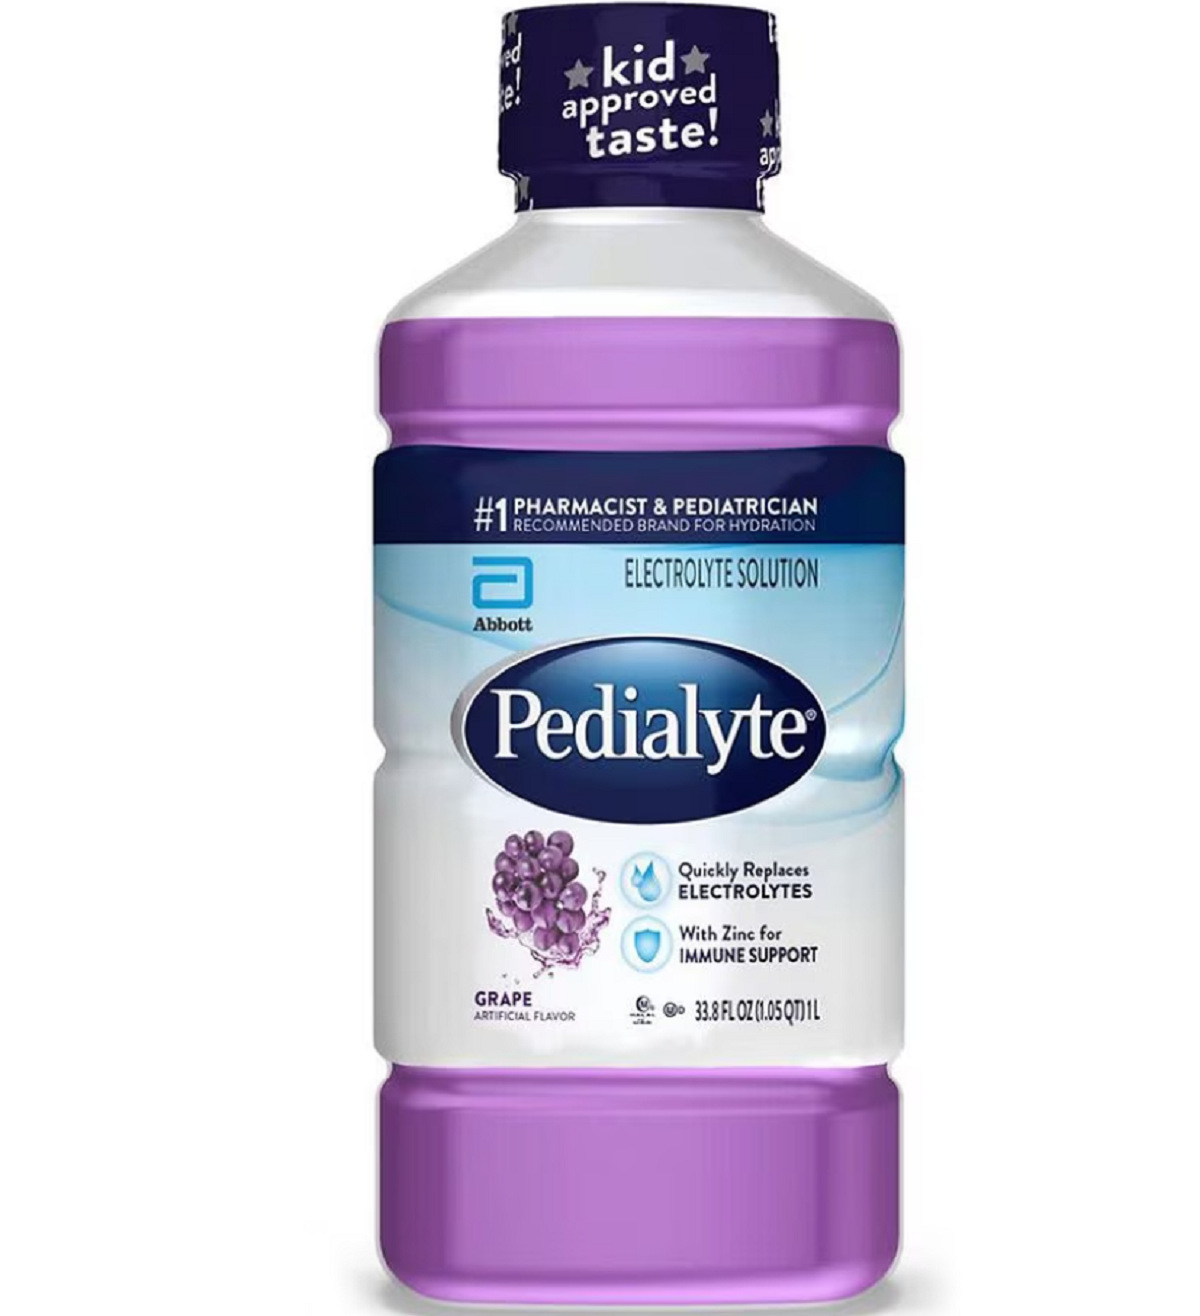 Pedialyte Electrolyte Coupon: $2 Off Any 1 Pedialyte Product